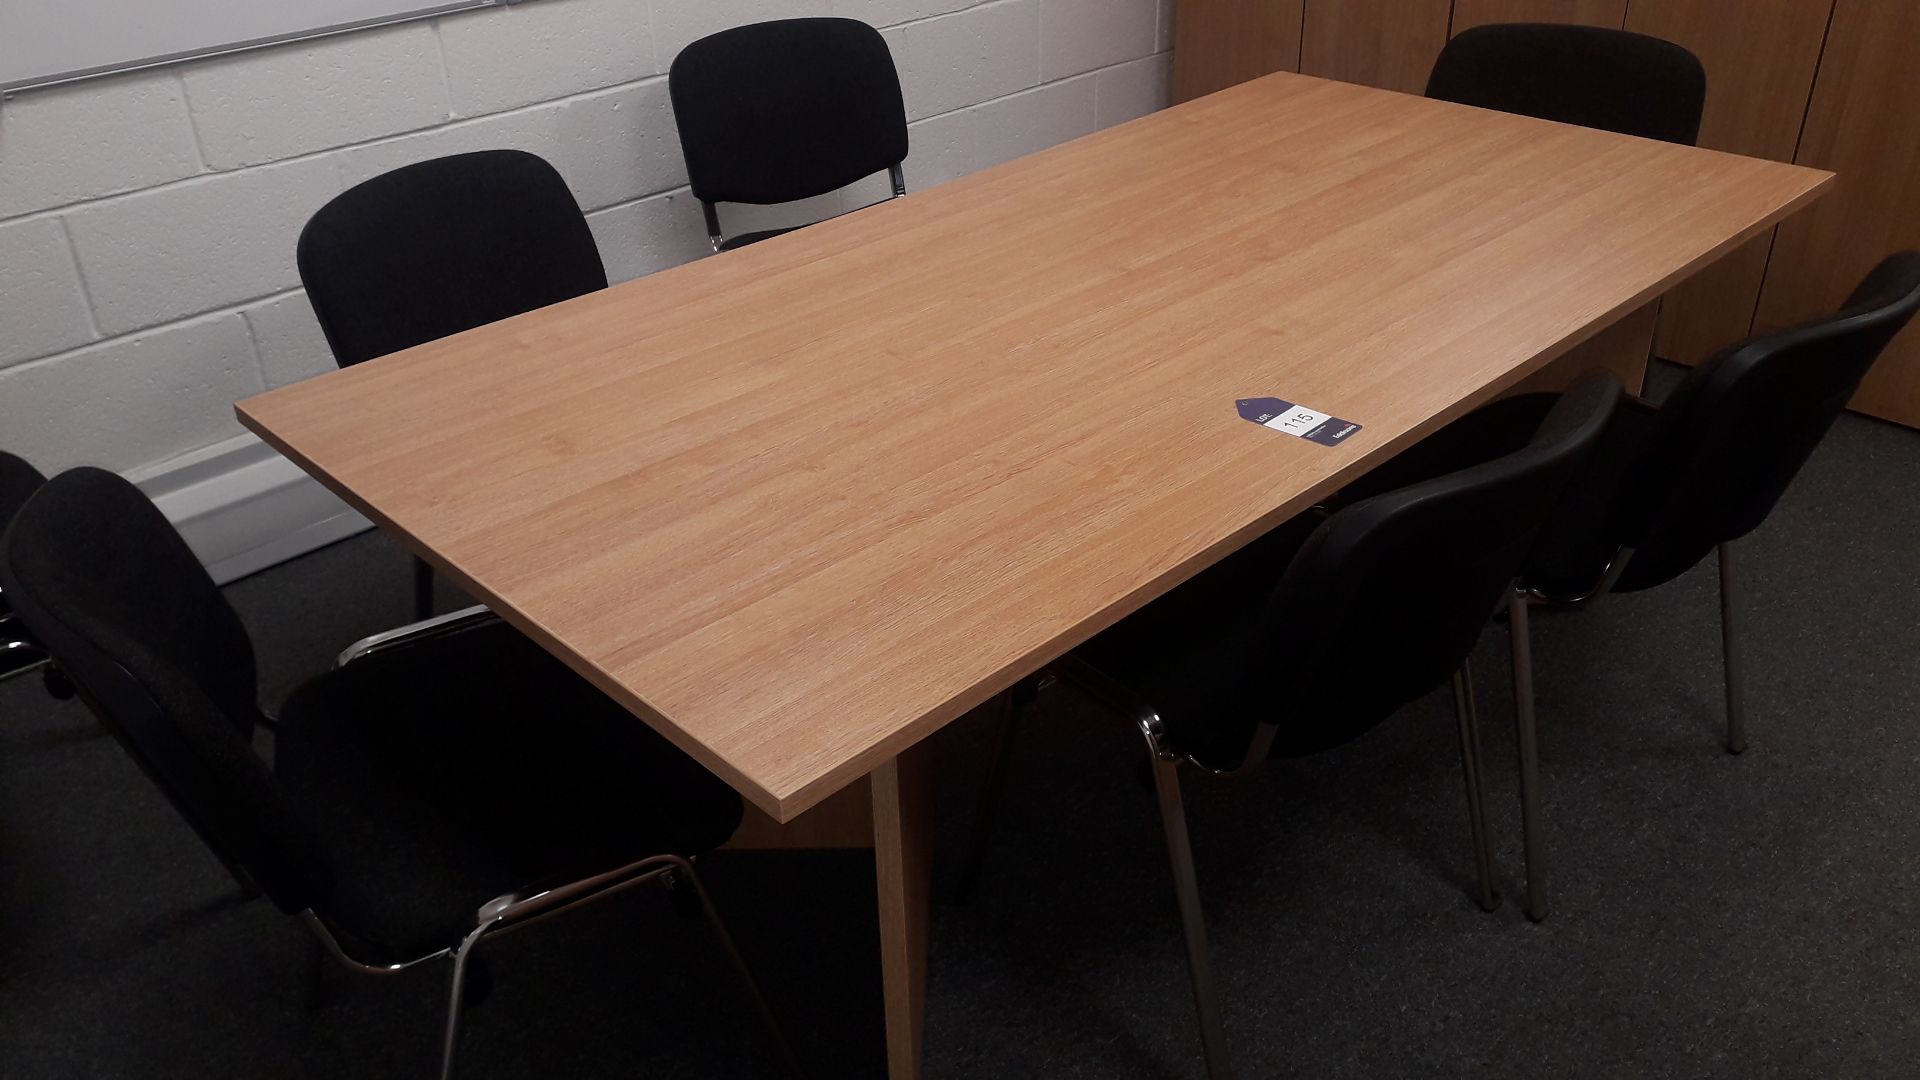 Meeting Table with 8 Chairs – (Located on First Floor) - Image 2 of 2